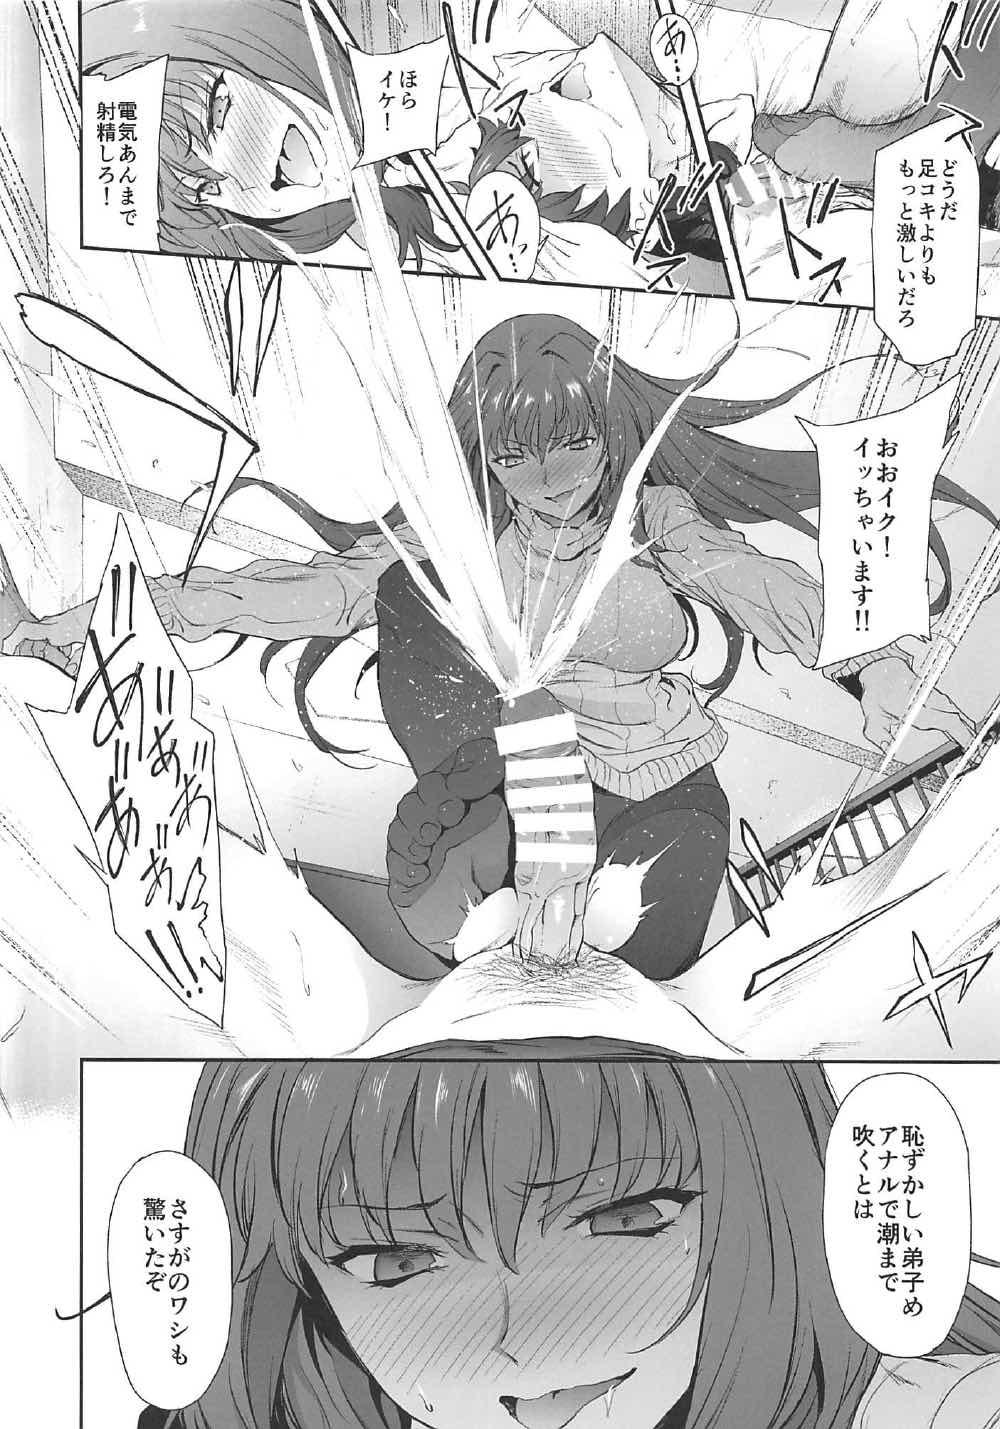 Whipping Scathach-shishou ni Okasareru Hon 2 - Fate grand order Amateurs Gone - Page 13